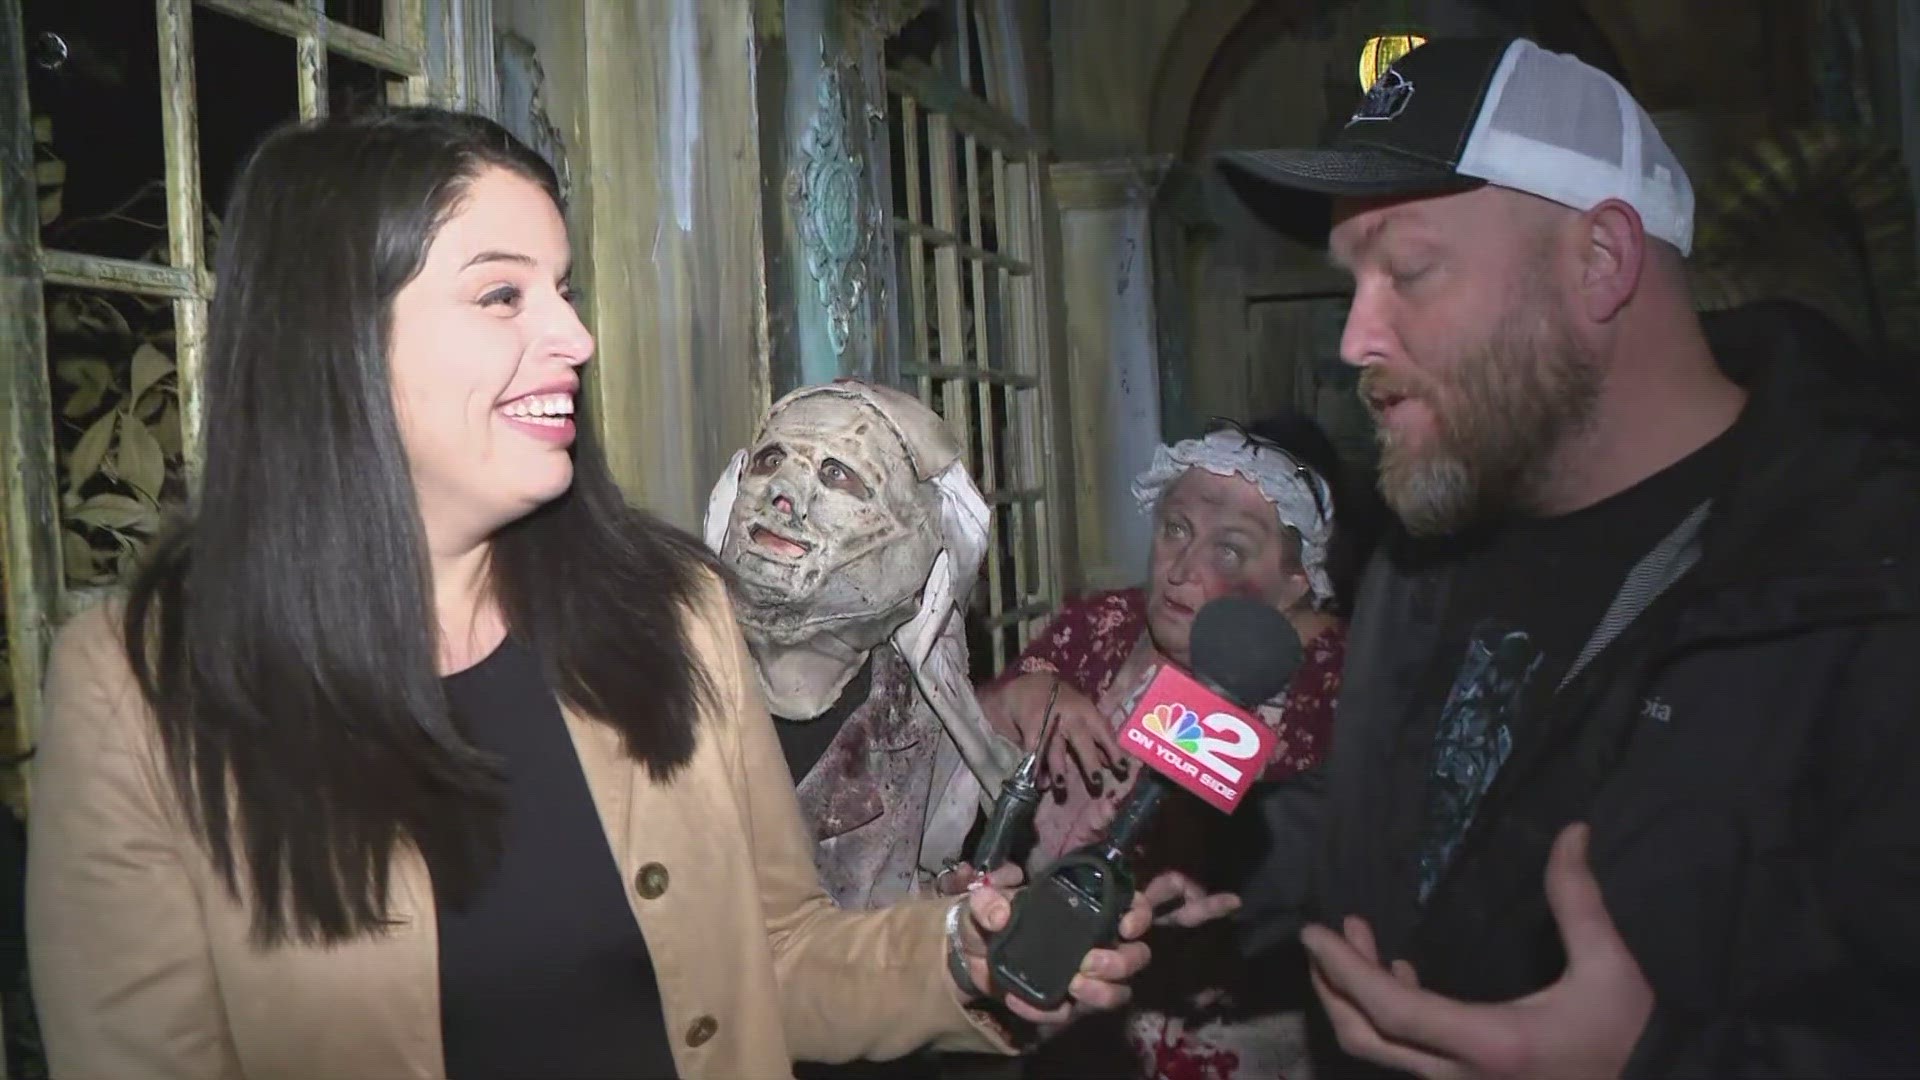 Everhaunt Haunted House gives back to the community in a scary fun way